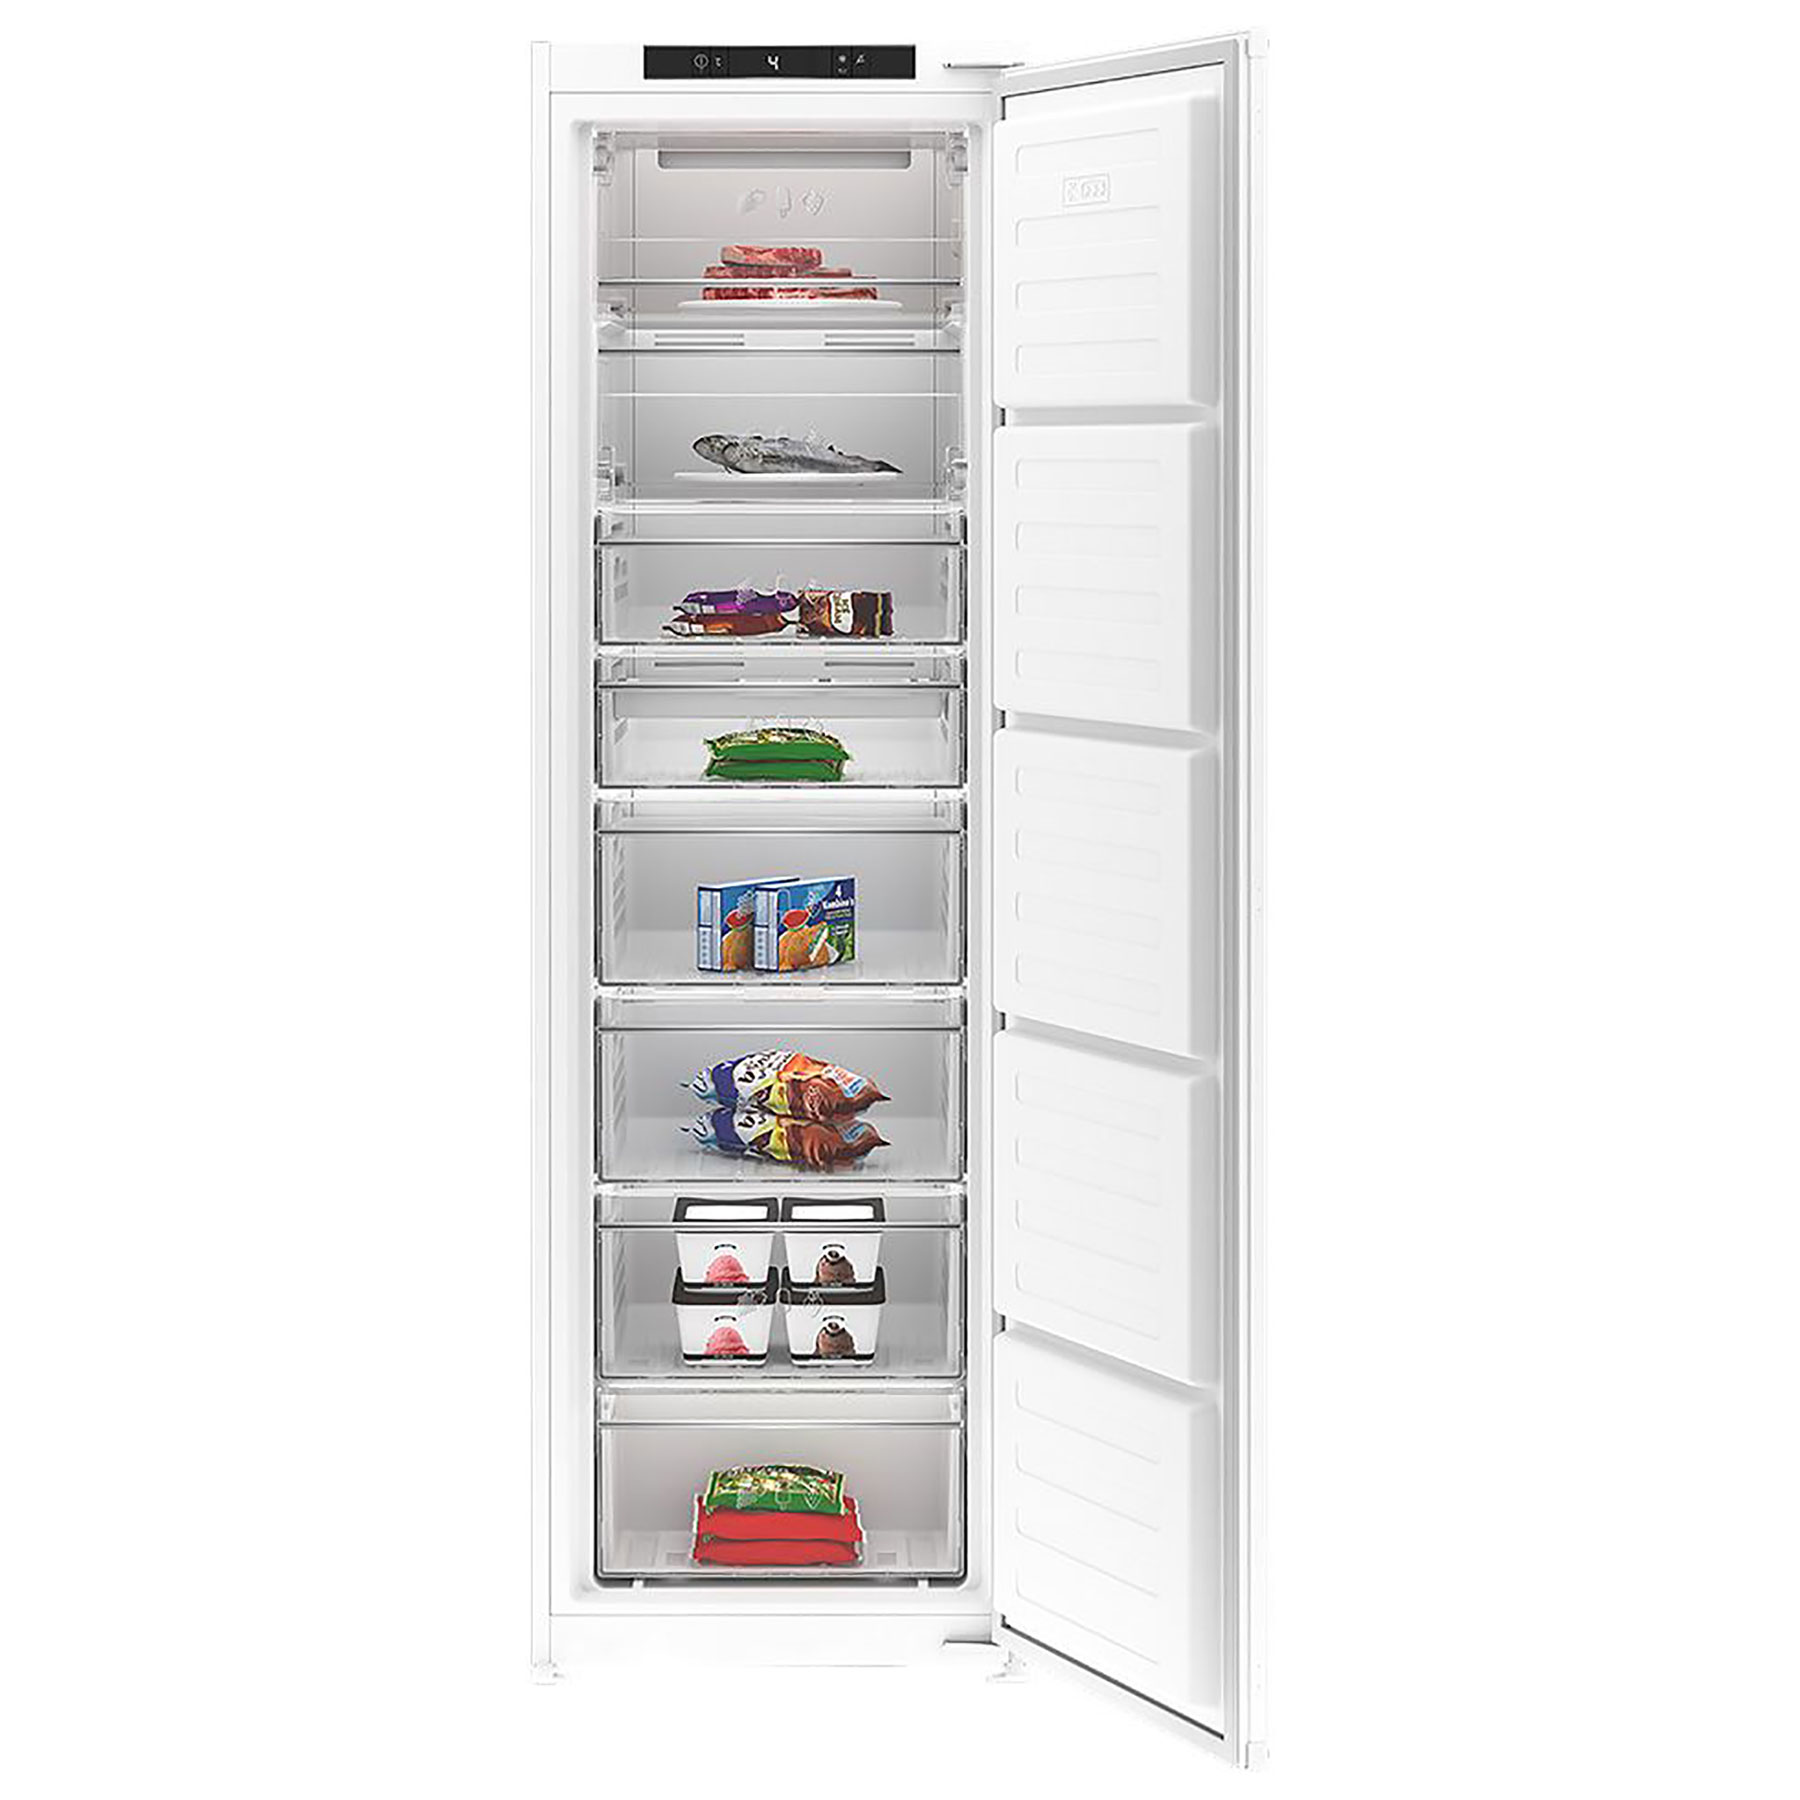 Image of Blomberg FNT4454I 55cm Built In Integrated Freezer 1 77m E Rated